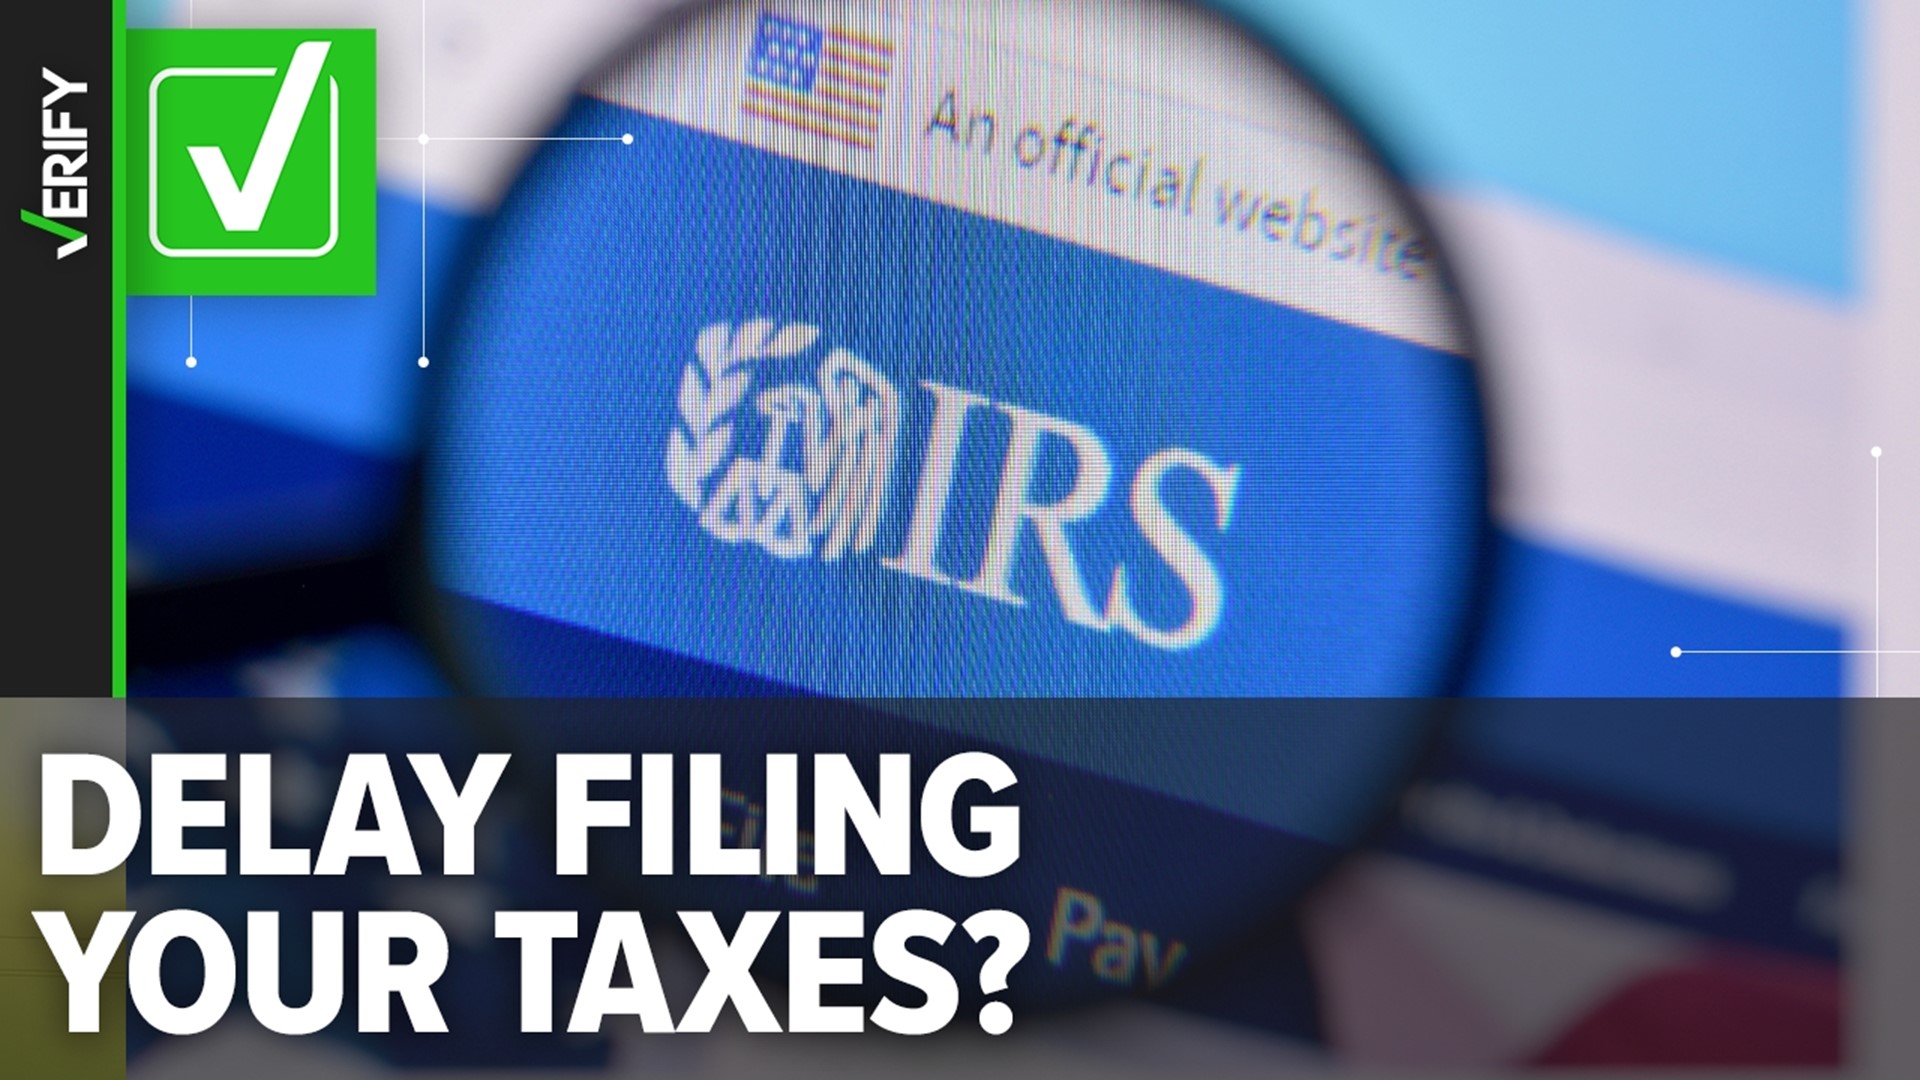 The IRS says people who received tax rebates or relief checks from their state in 2022 should hold off on filing their income tax return. Here’s why.